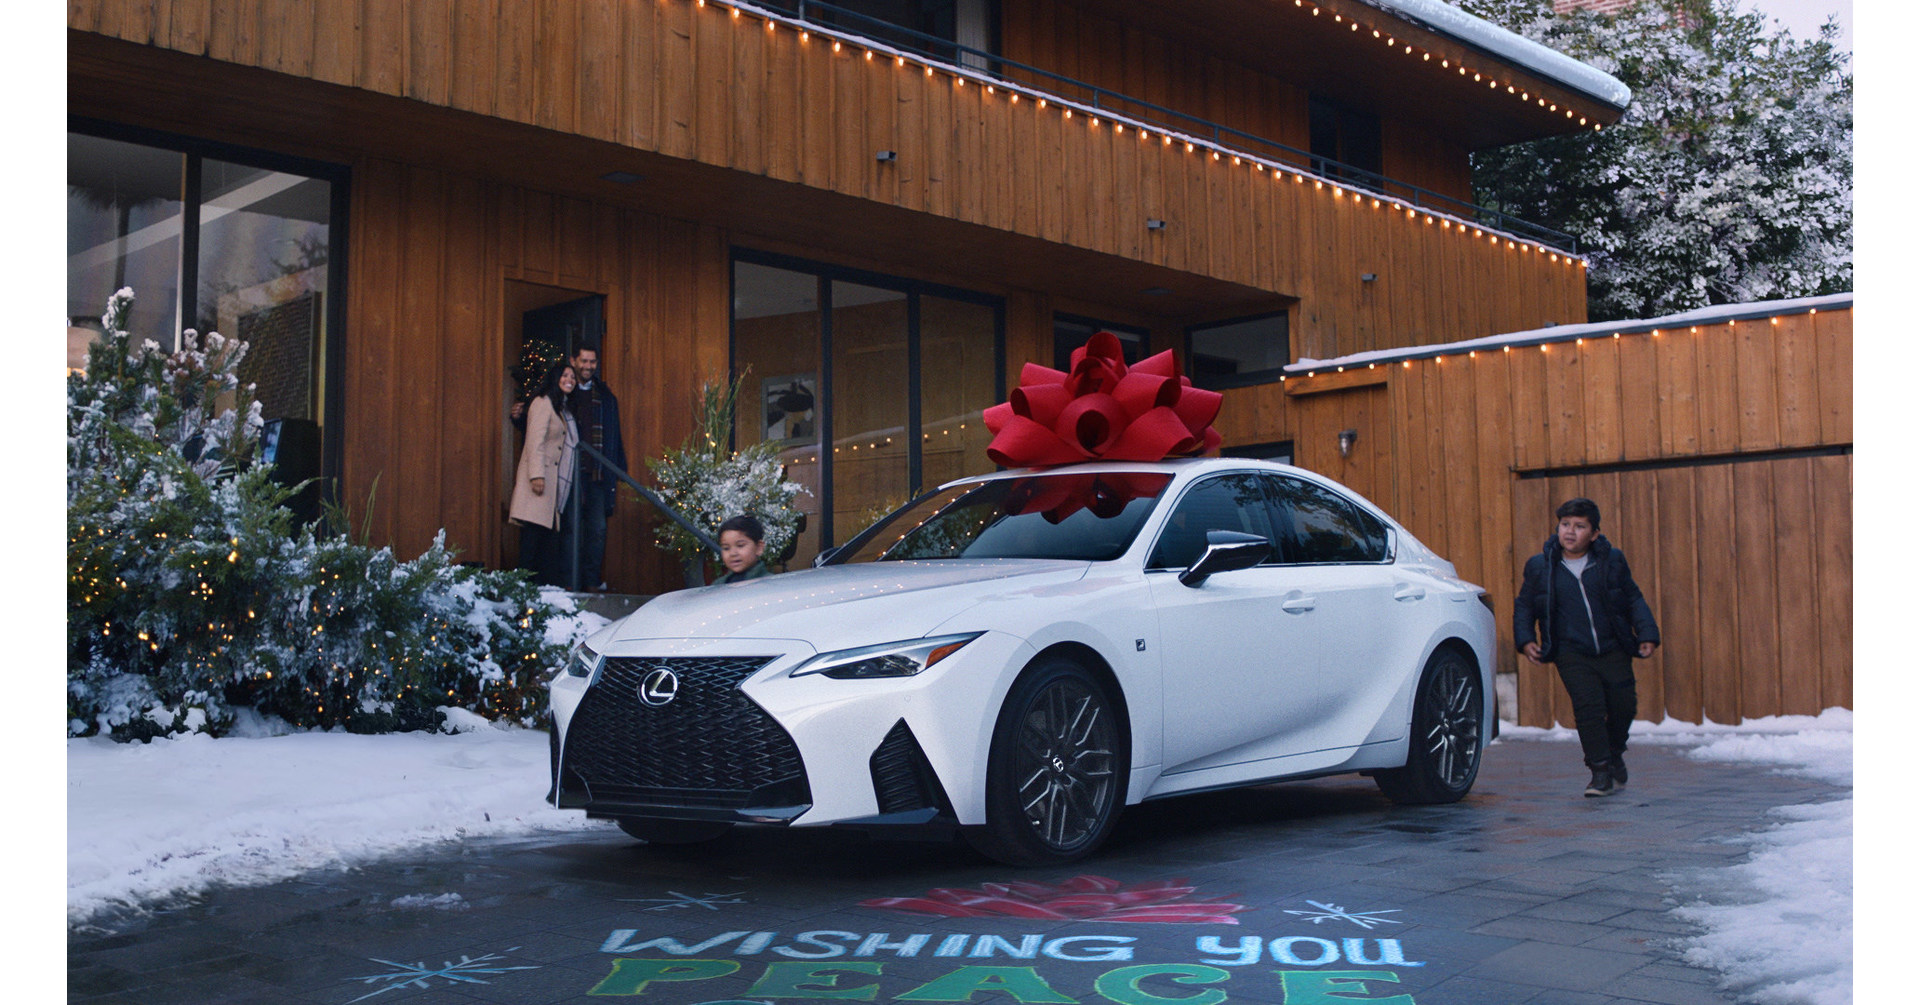 Driveway Moments Celebrated in Lexus "December to Remember" Campaign